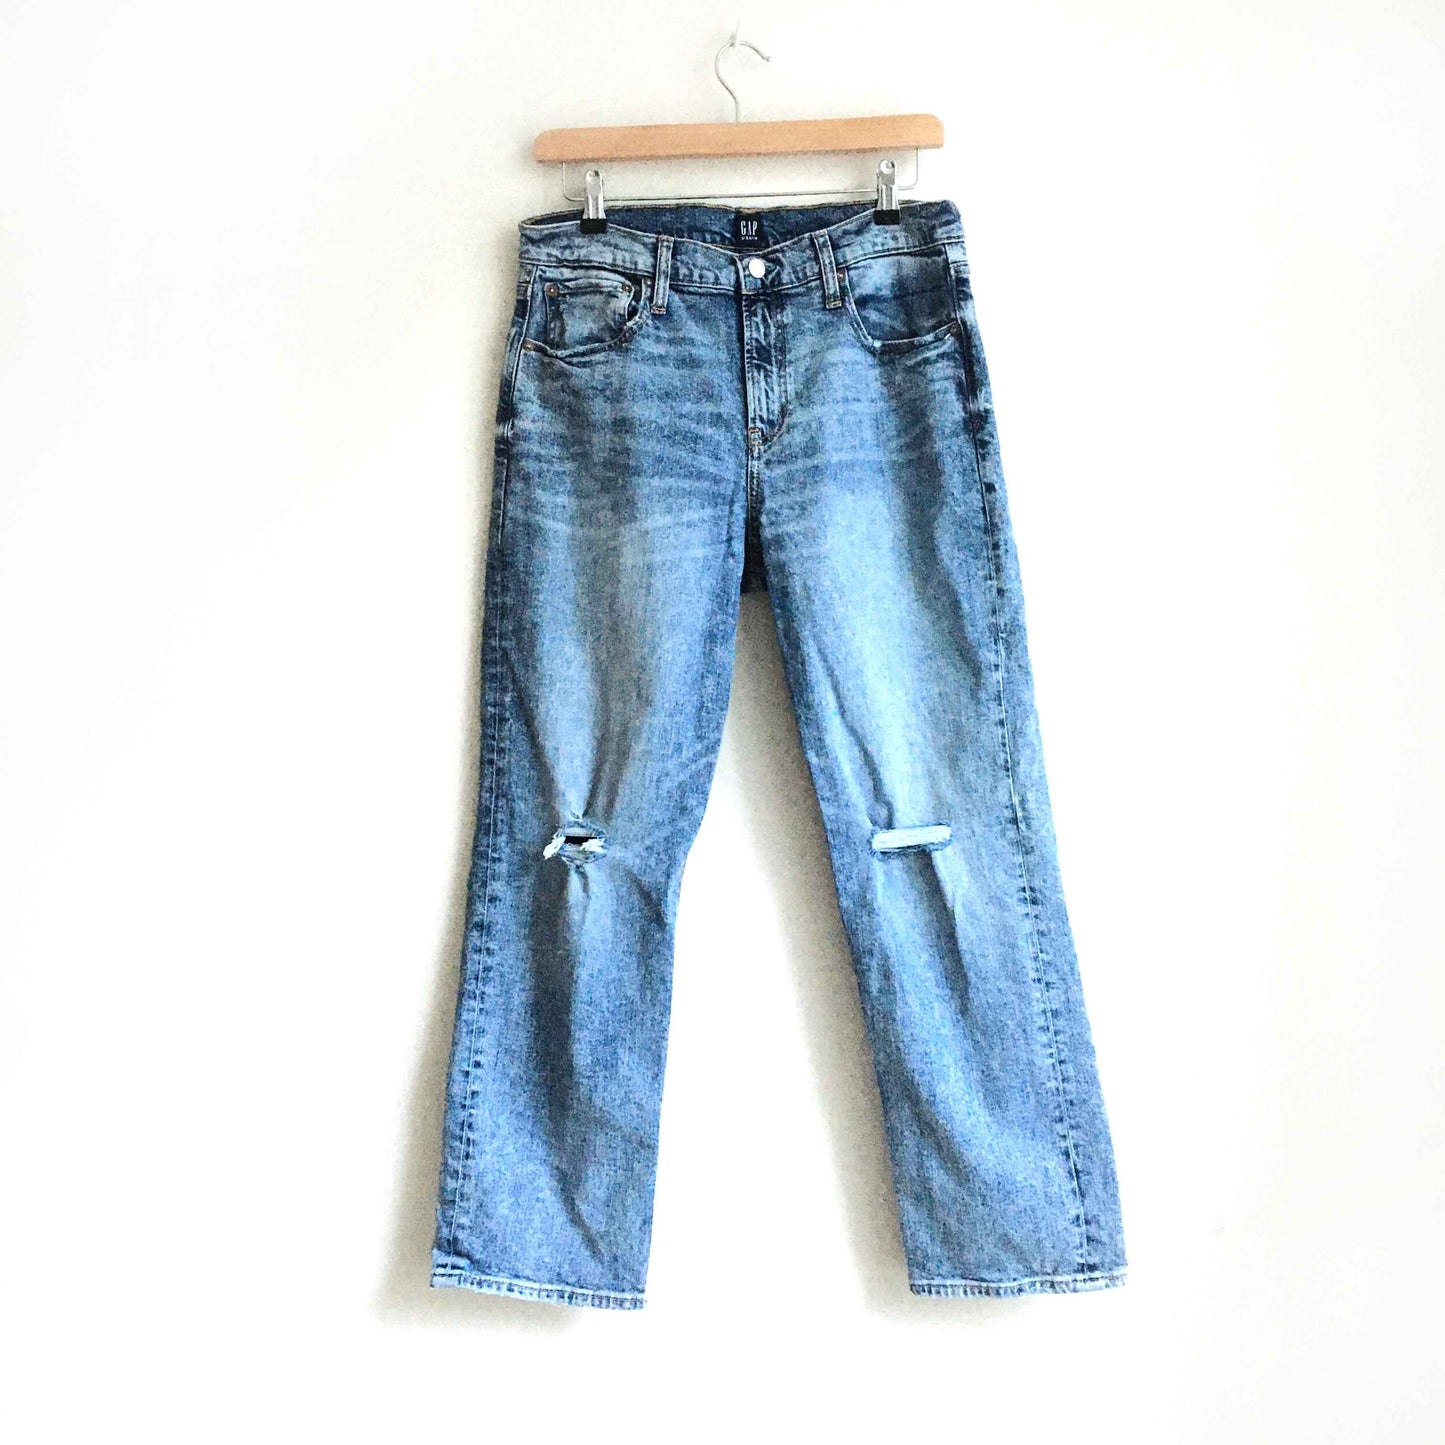 GAP high-rise cheeky straight jeans - size 31